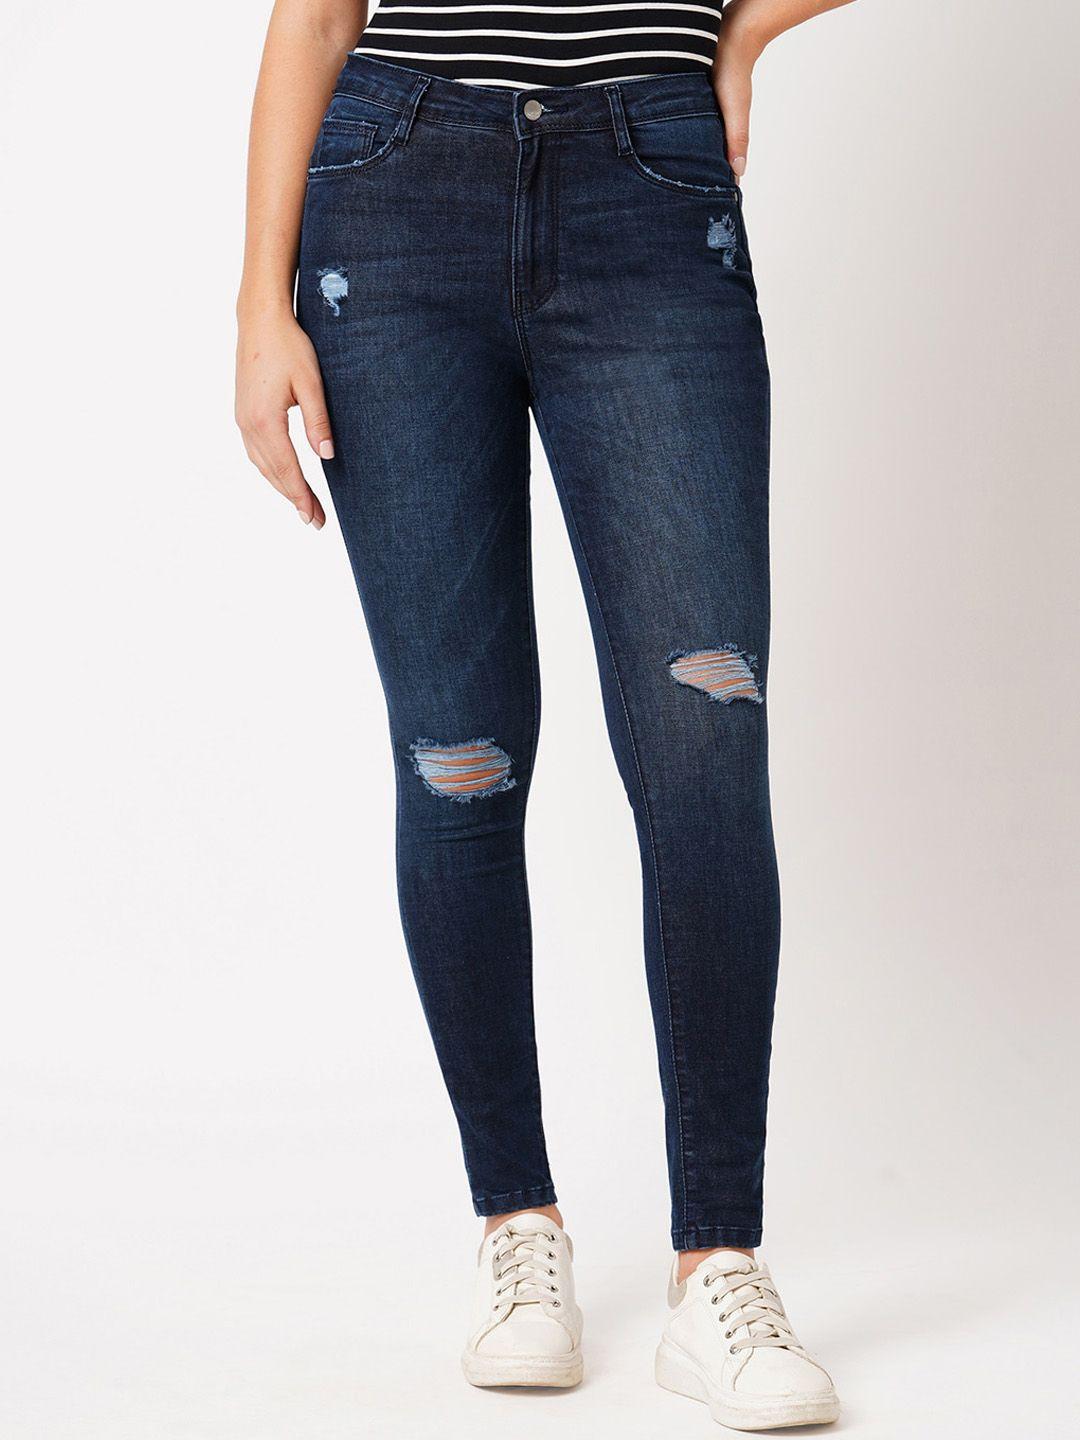 kraus-jeans-women-skinny-fit-high-rise-mildly-distressed-light-fade-stretchable-jeans